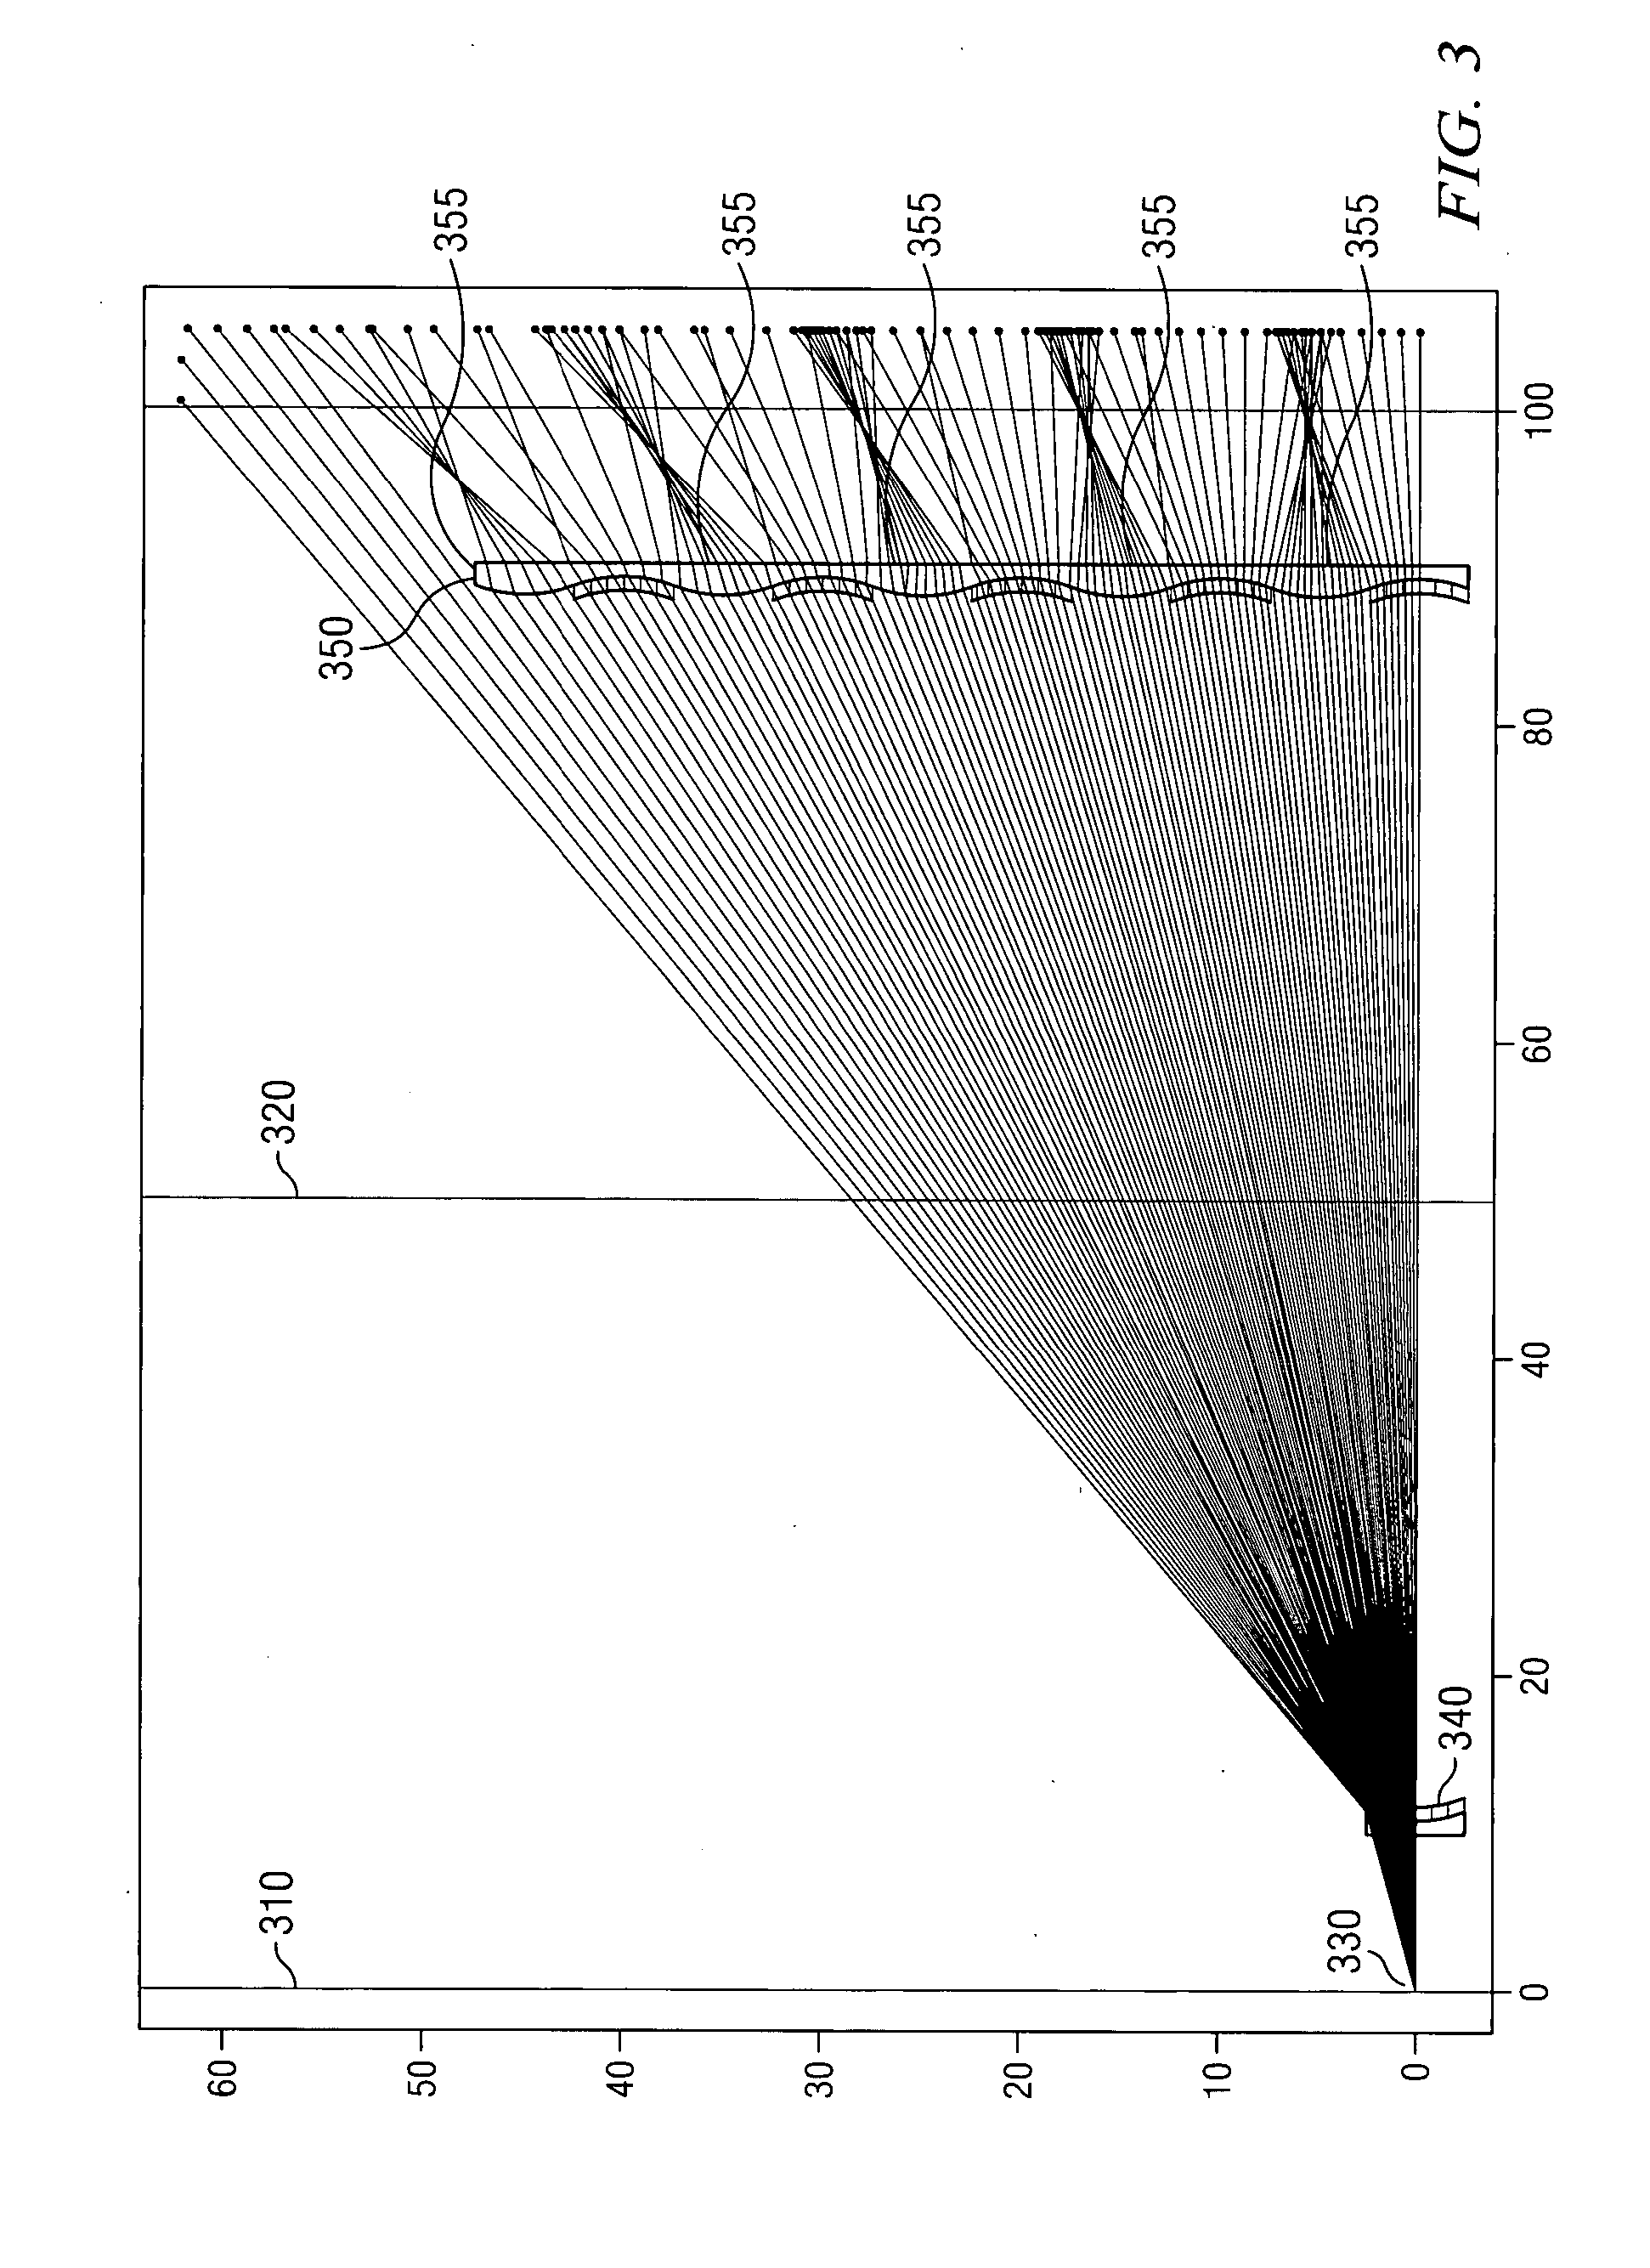 Distribution optical elements and compound collecting lenses for broadcast optical interconnect